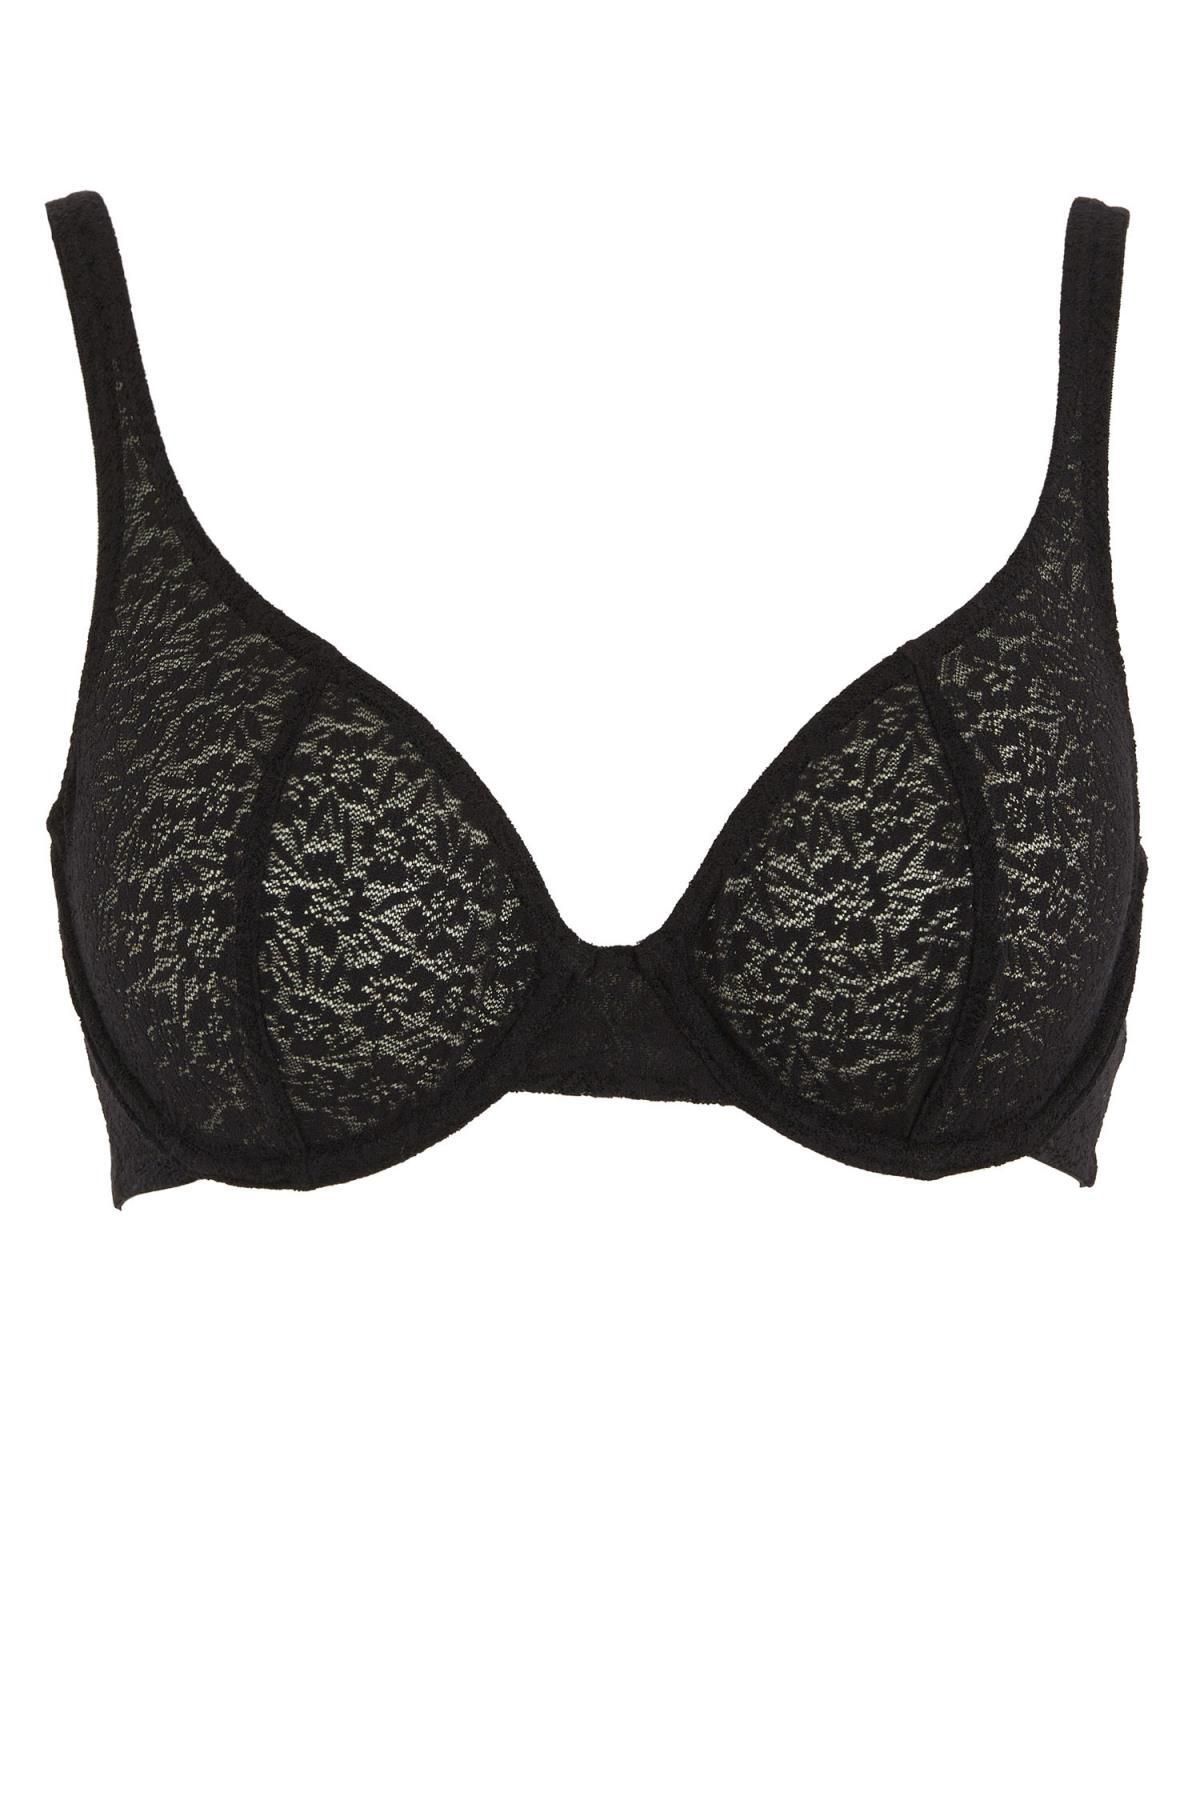 Defacto Fall In Love New Year Themed Coverless Padless Bra - Trendyol